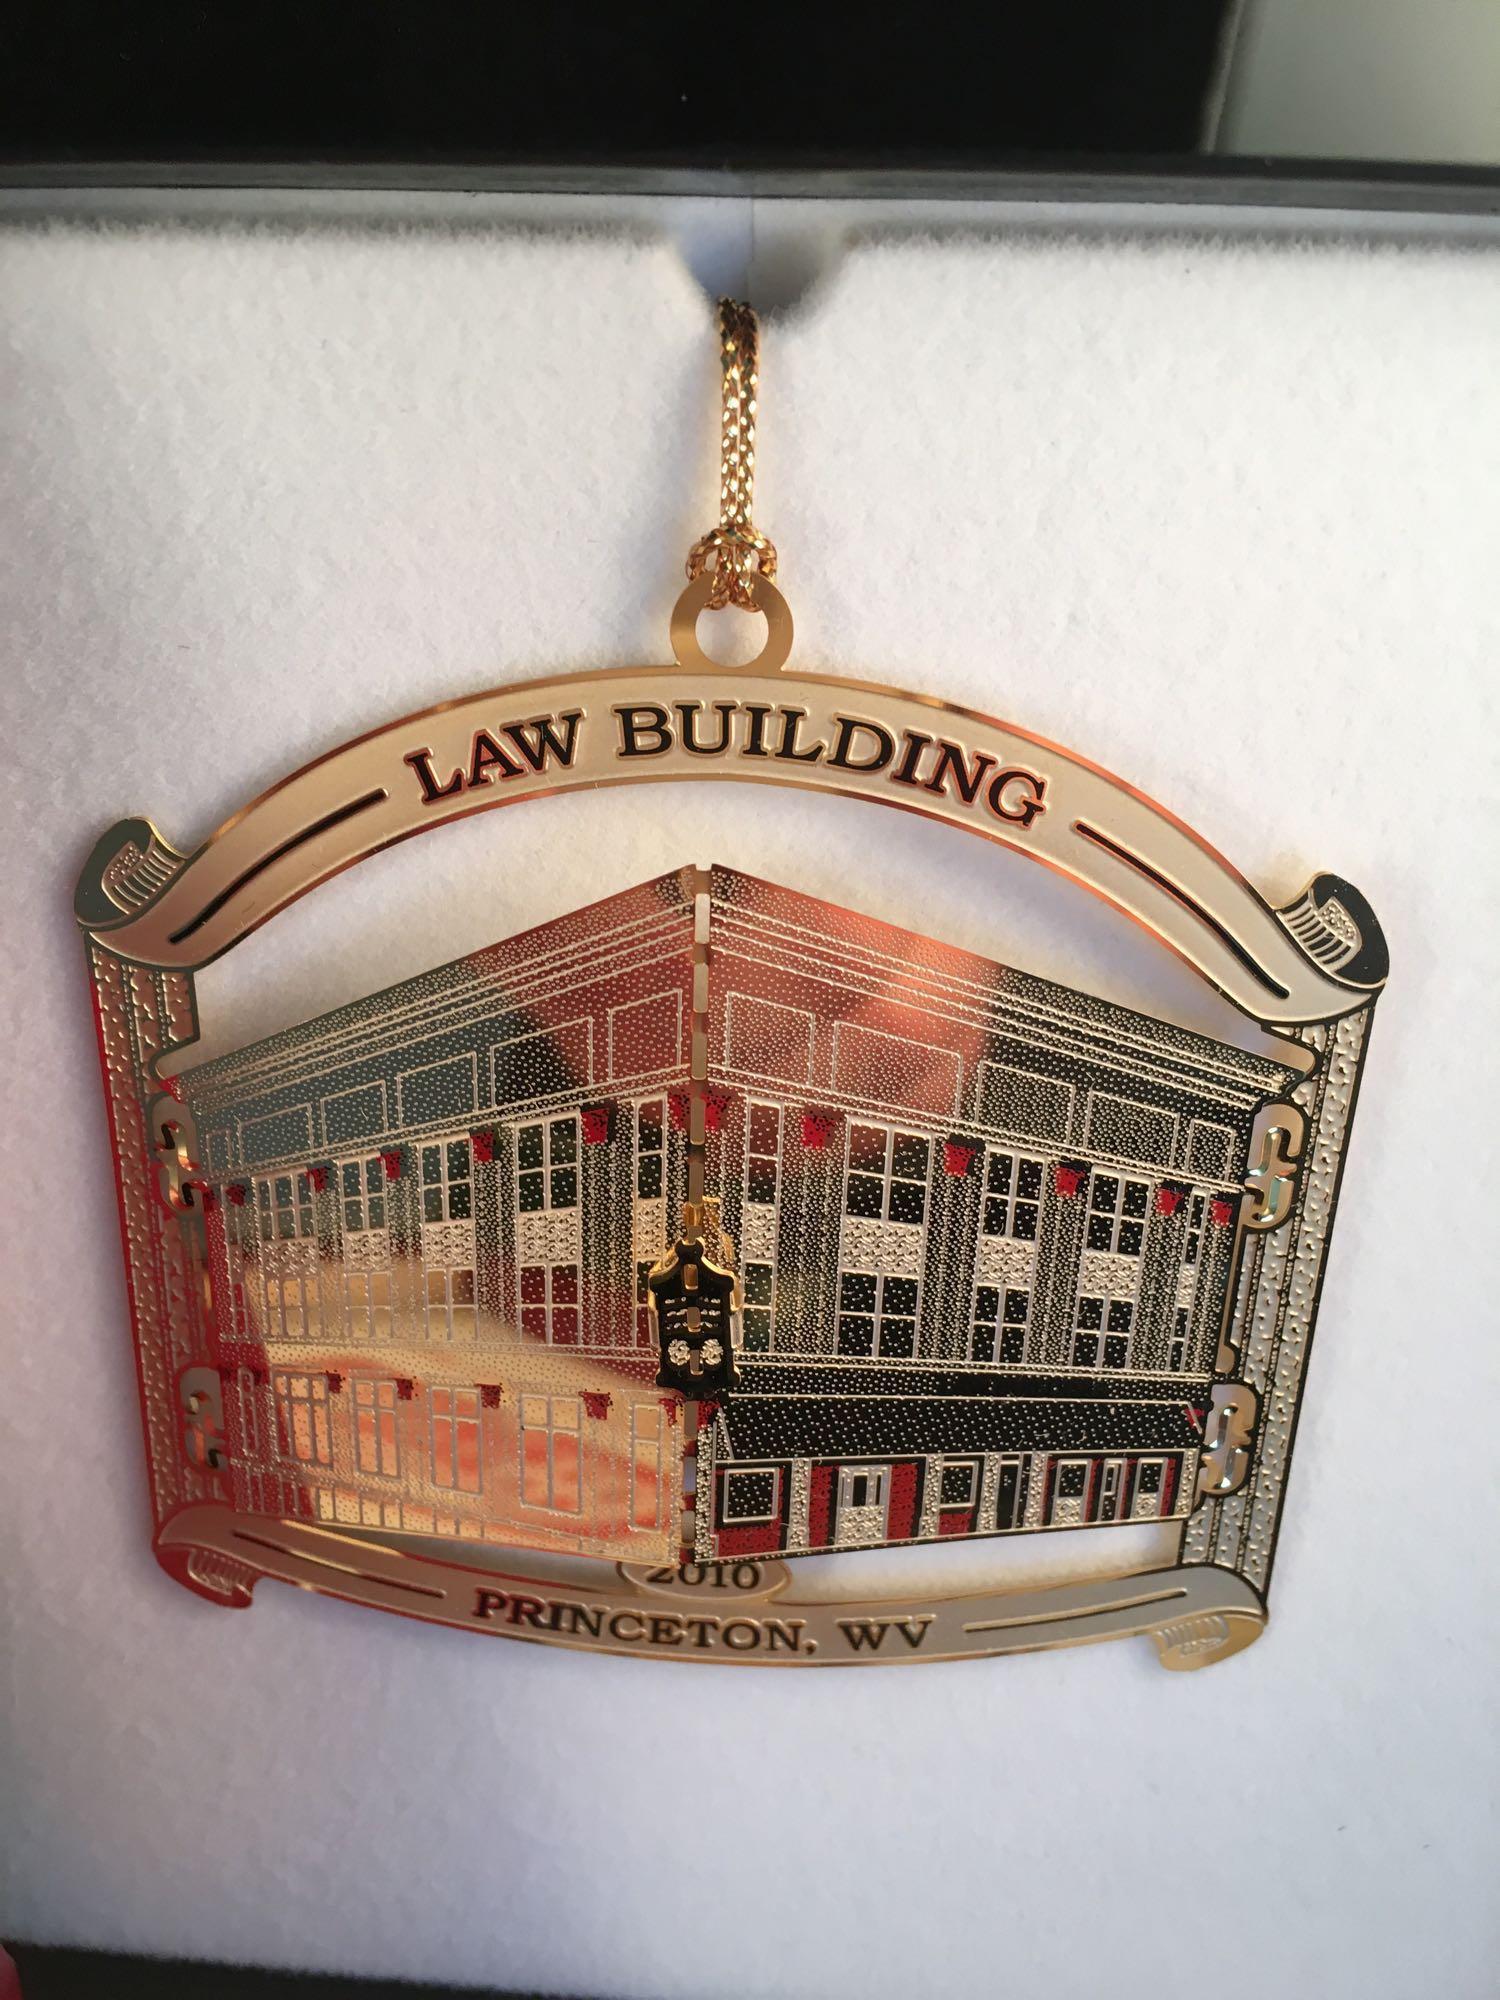 Holiday Collector Princeton Ornaments - Mercer Co Courthouse; Mecer Co Memorial Building; Law